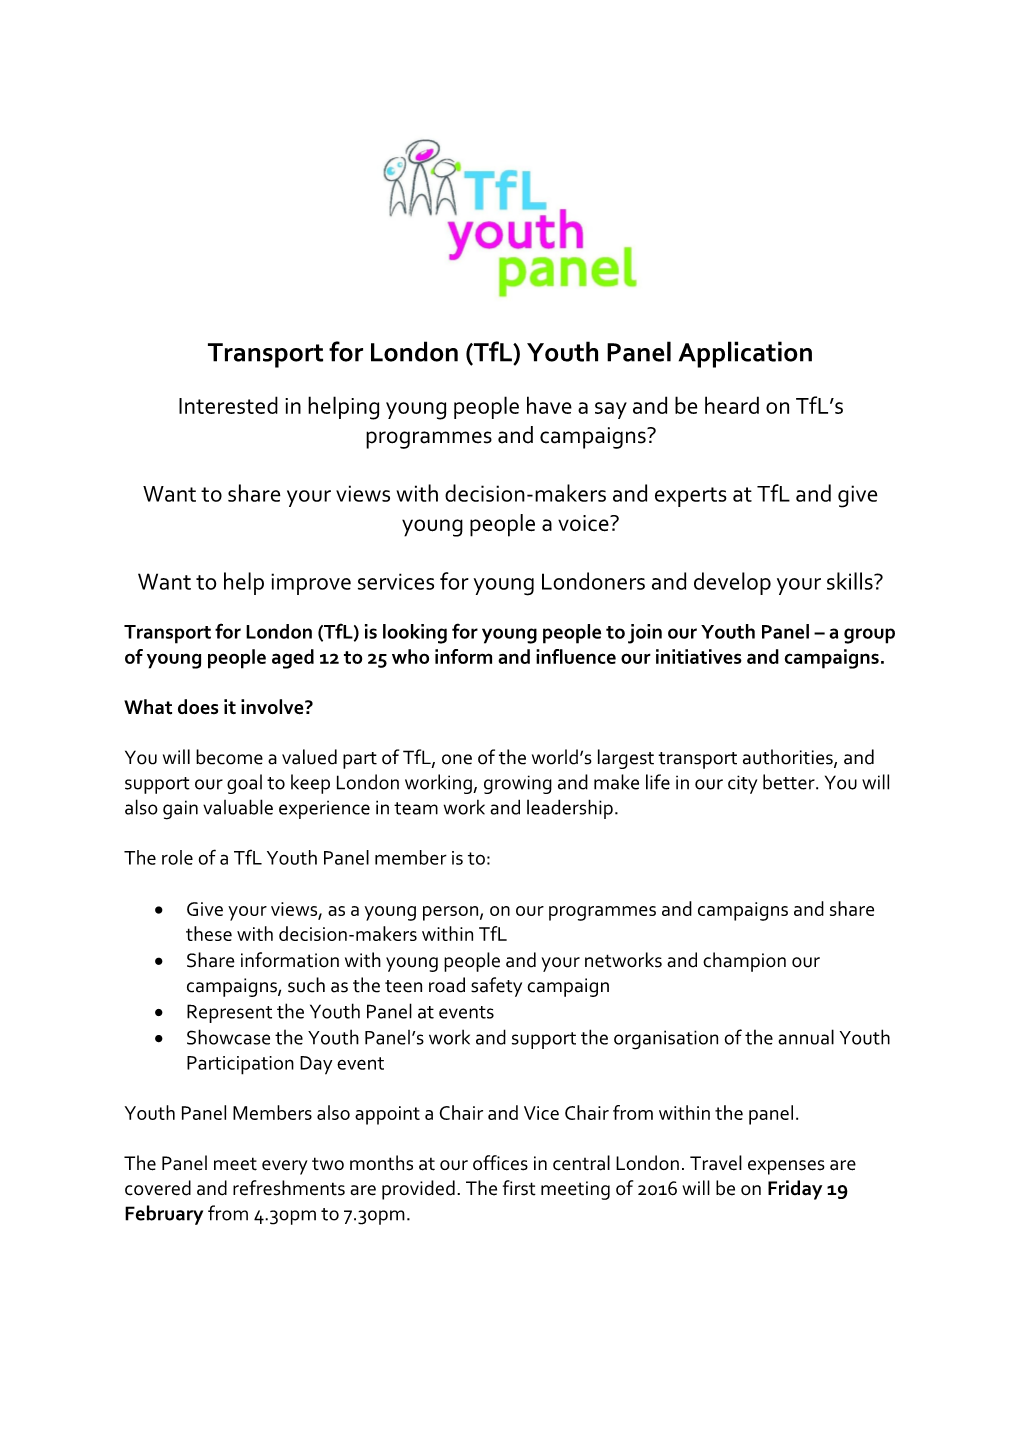 Transport for London (Tfl)Youth Panel Application